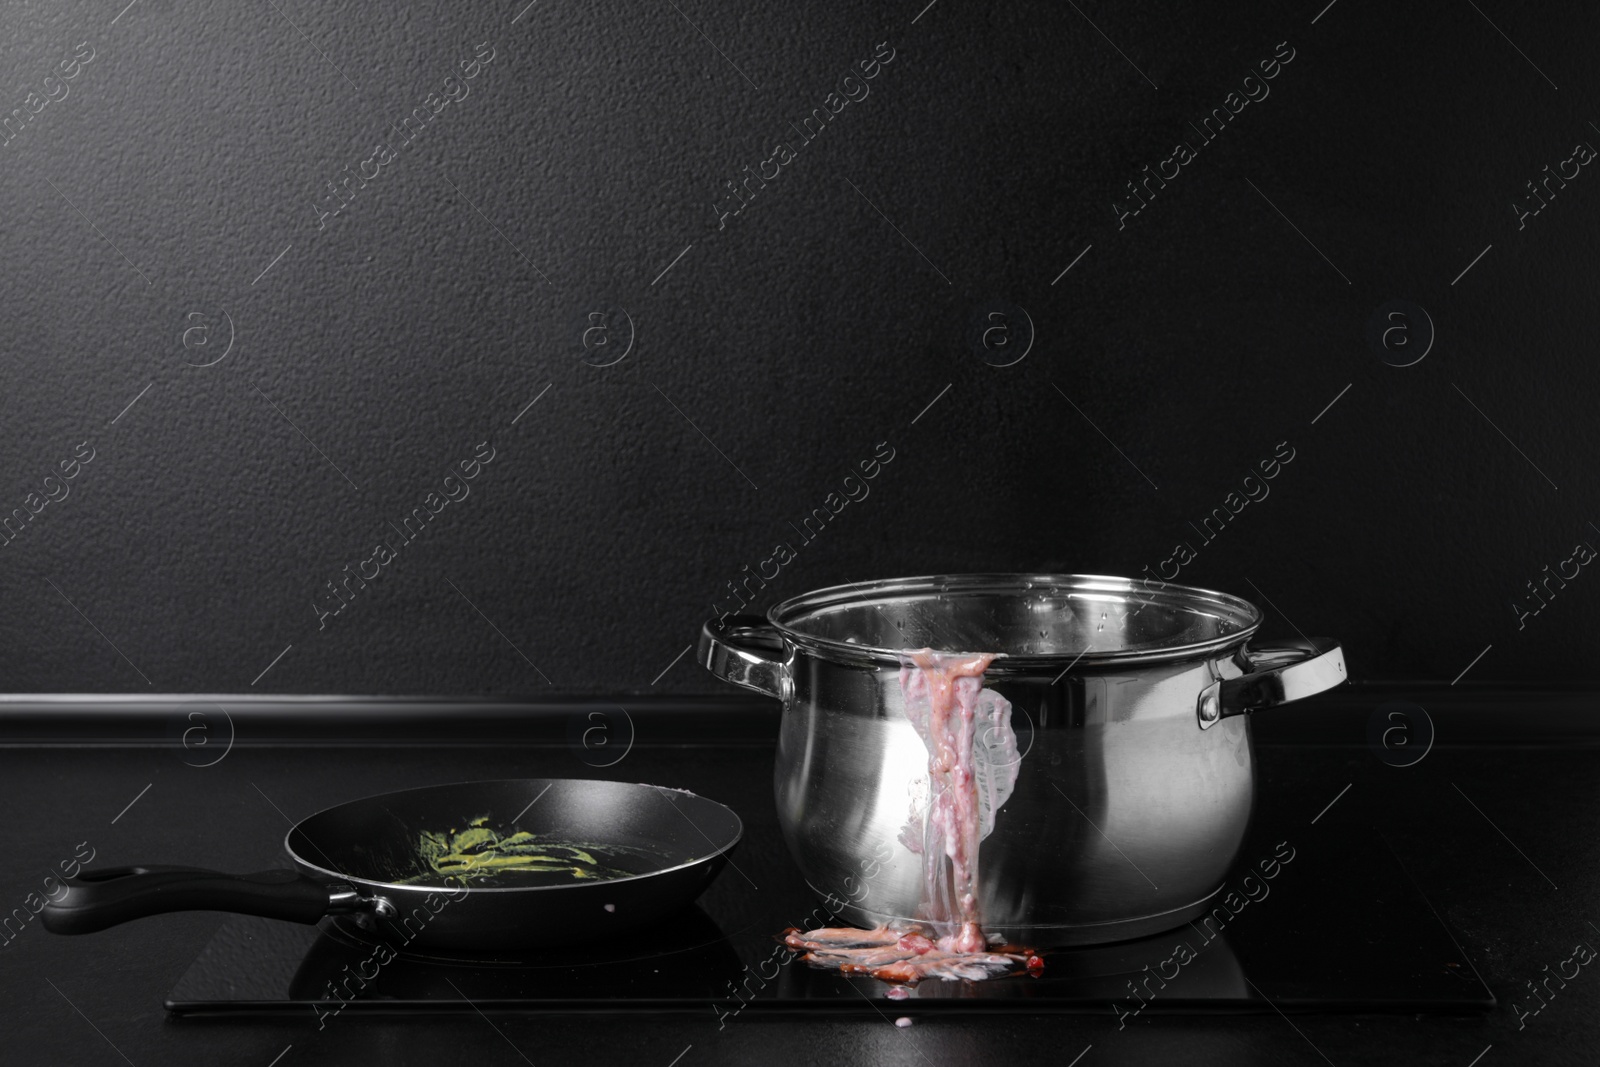 Photo of Dirty pot and frying pan on cooktop in kitchen